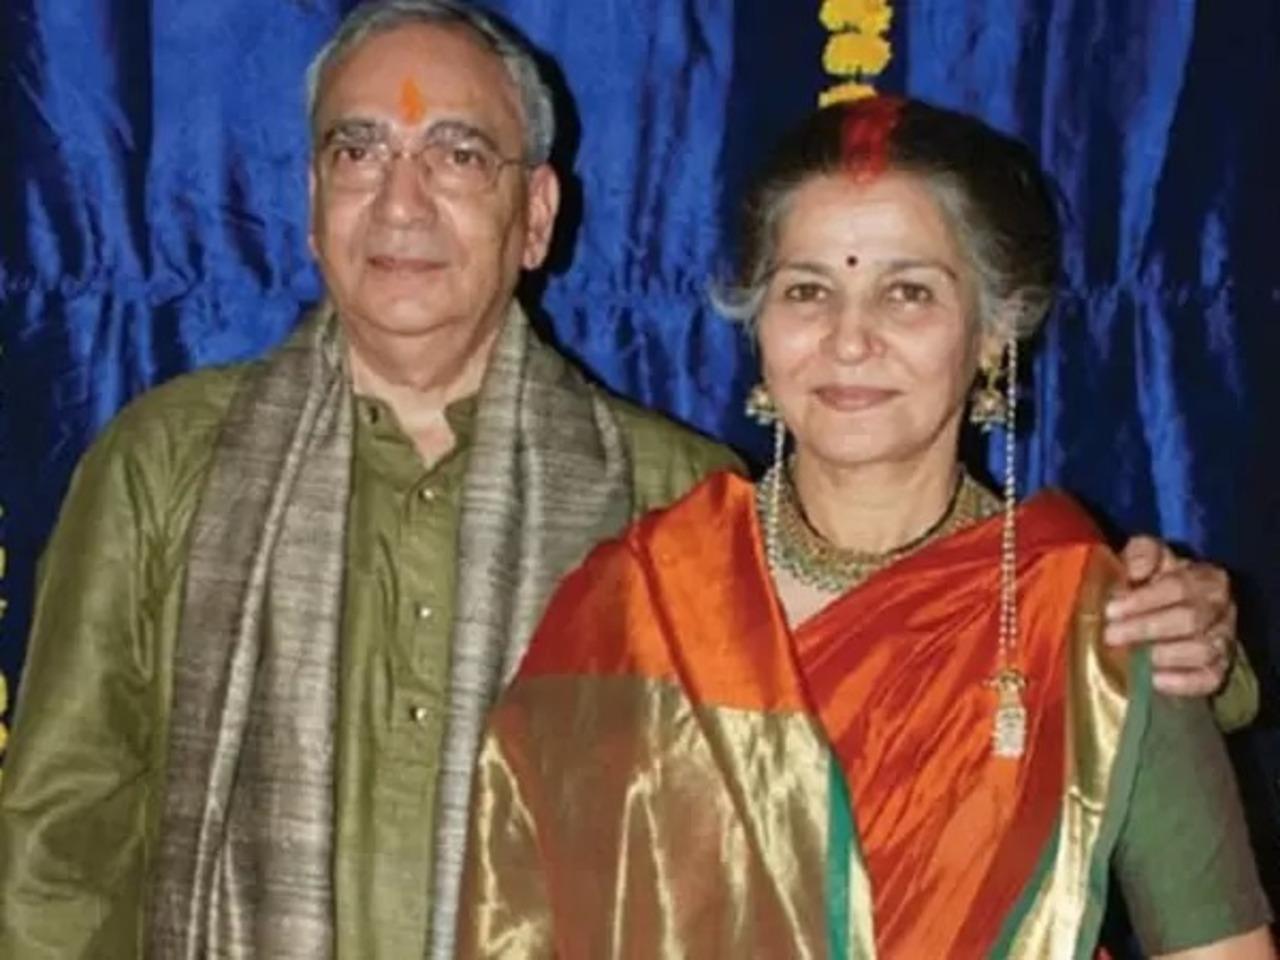 On 16 January 2011 she got married at Arya Samaj to a physicist, Prof. Atul Gurtu. The couple met on Facebook and Suhasini tied the knot when she was 60